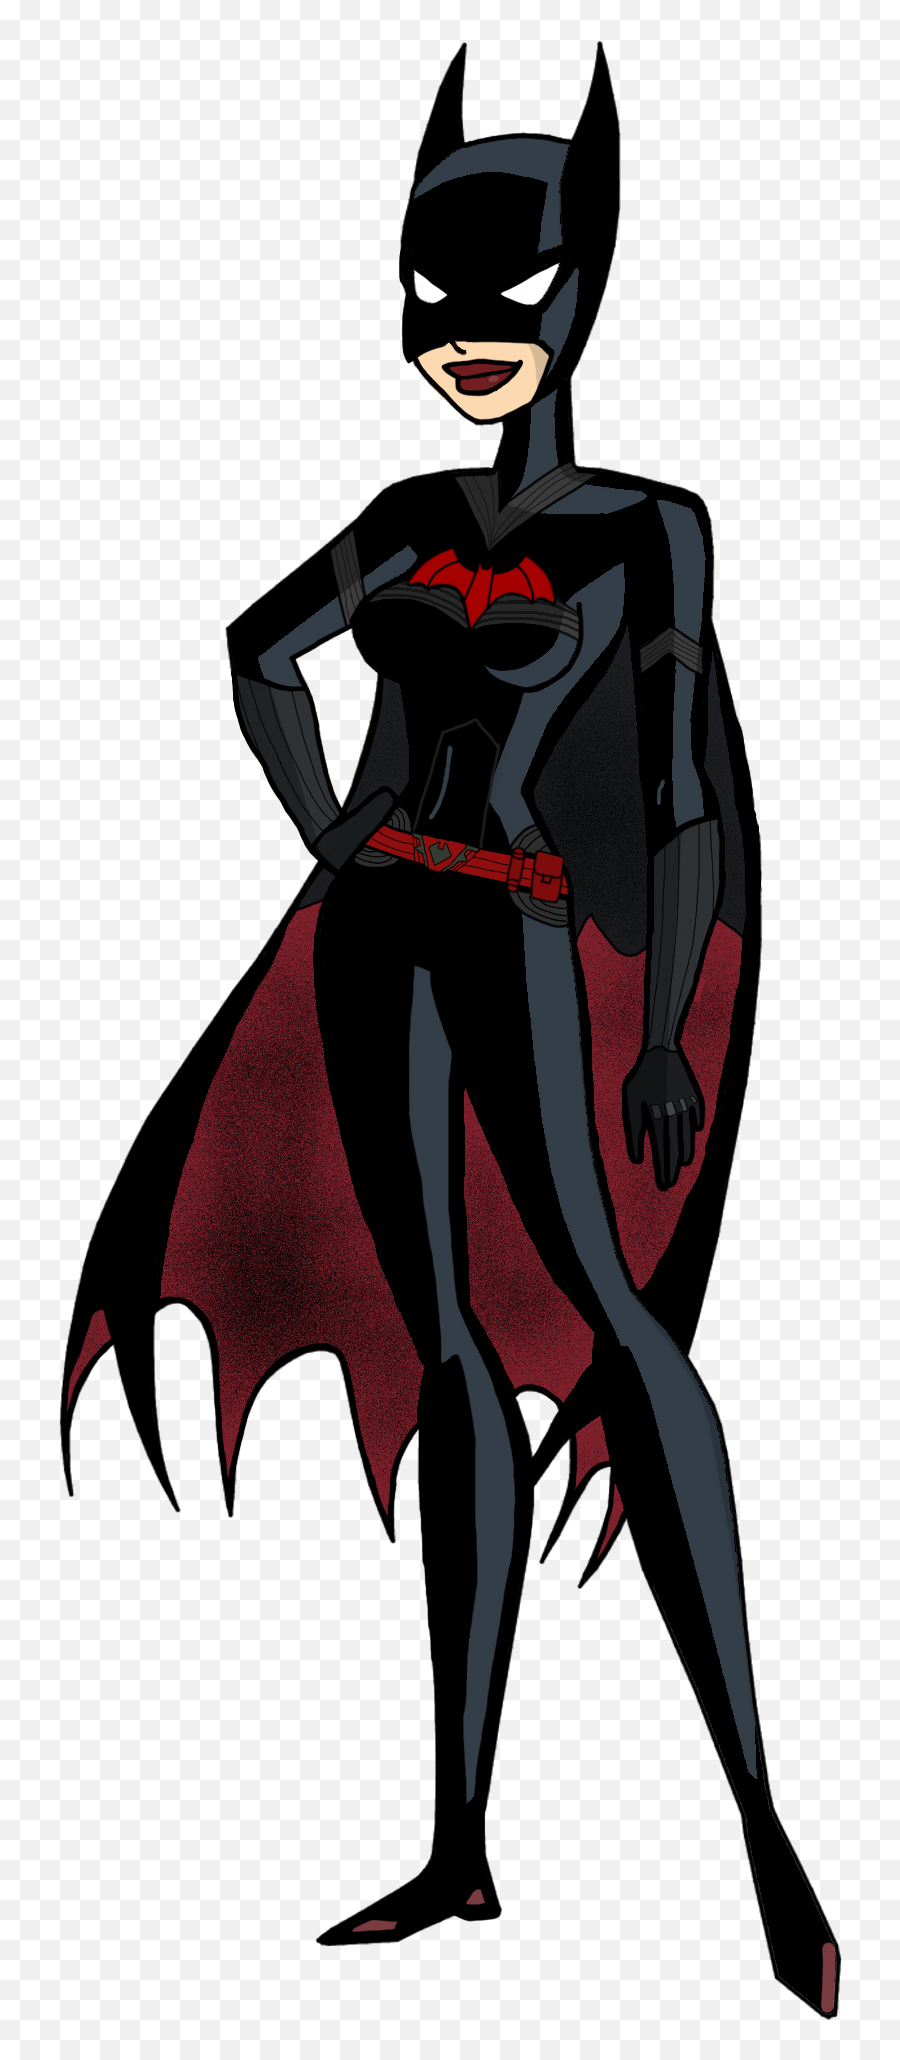 The Batwoman Movie Into Cw - Batman Mystery Of The Batwoman Batwoman Png,Batwomen Logo